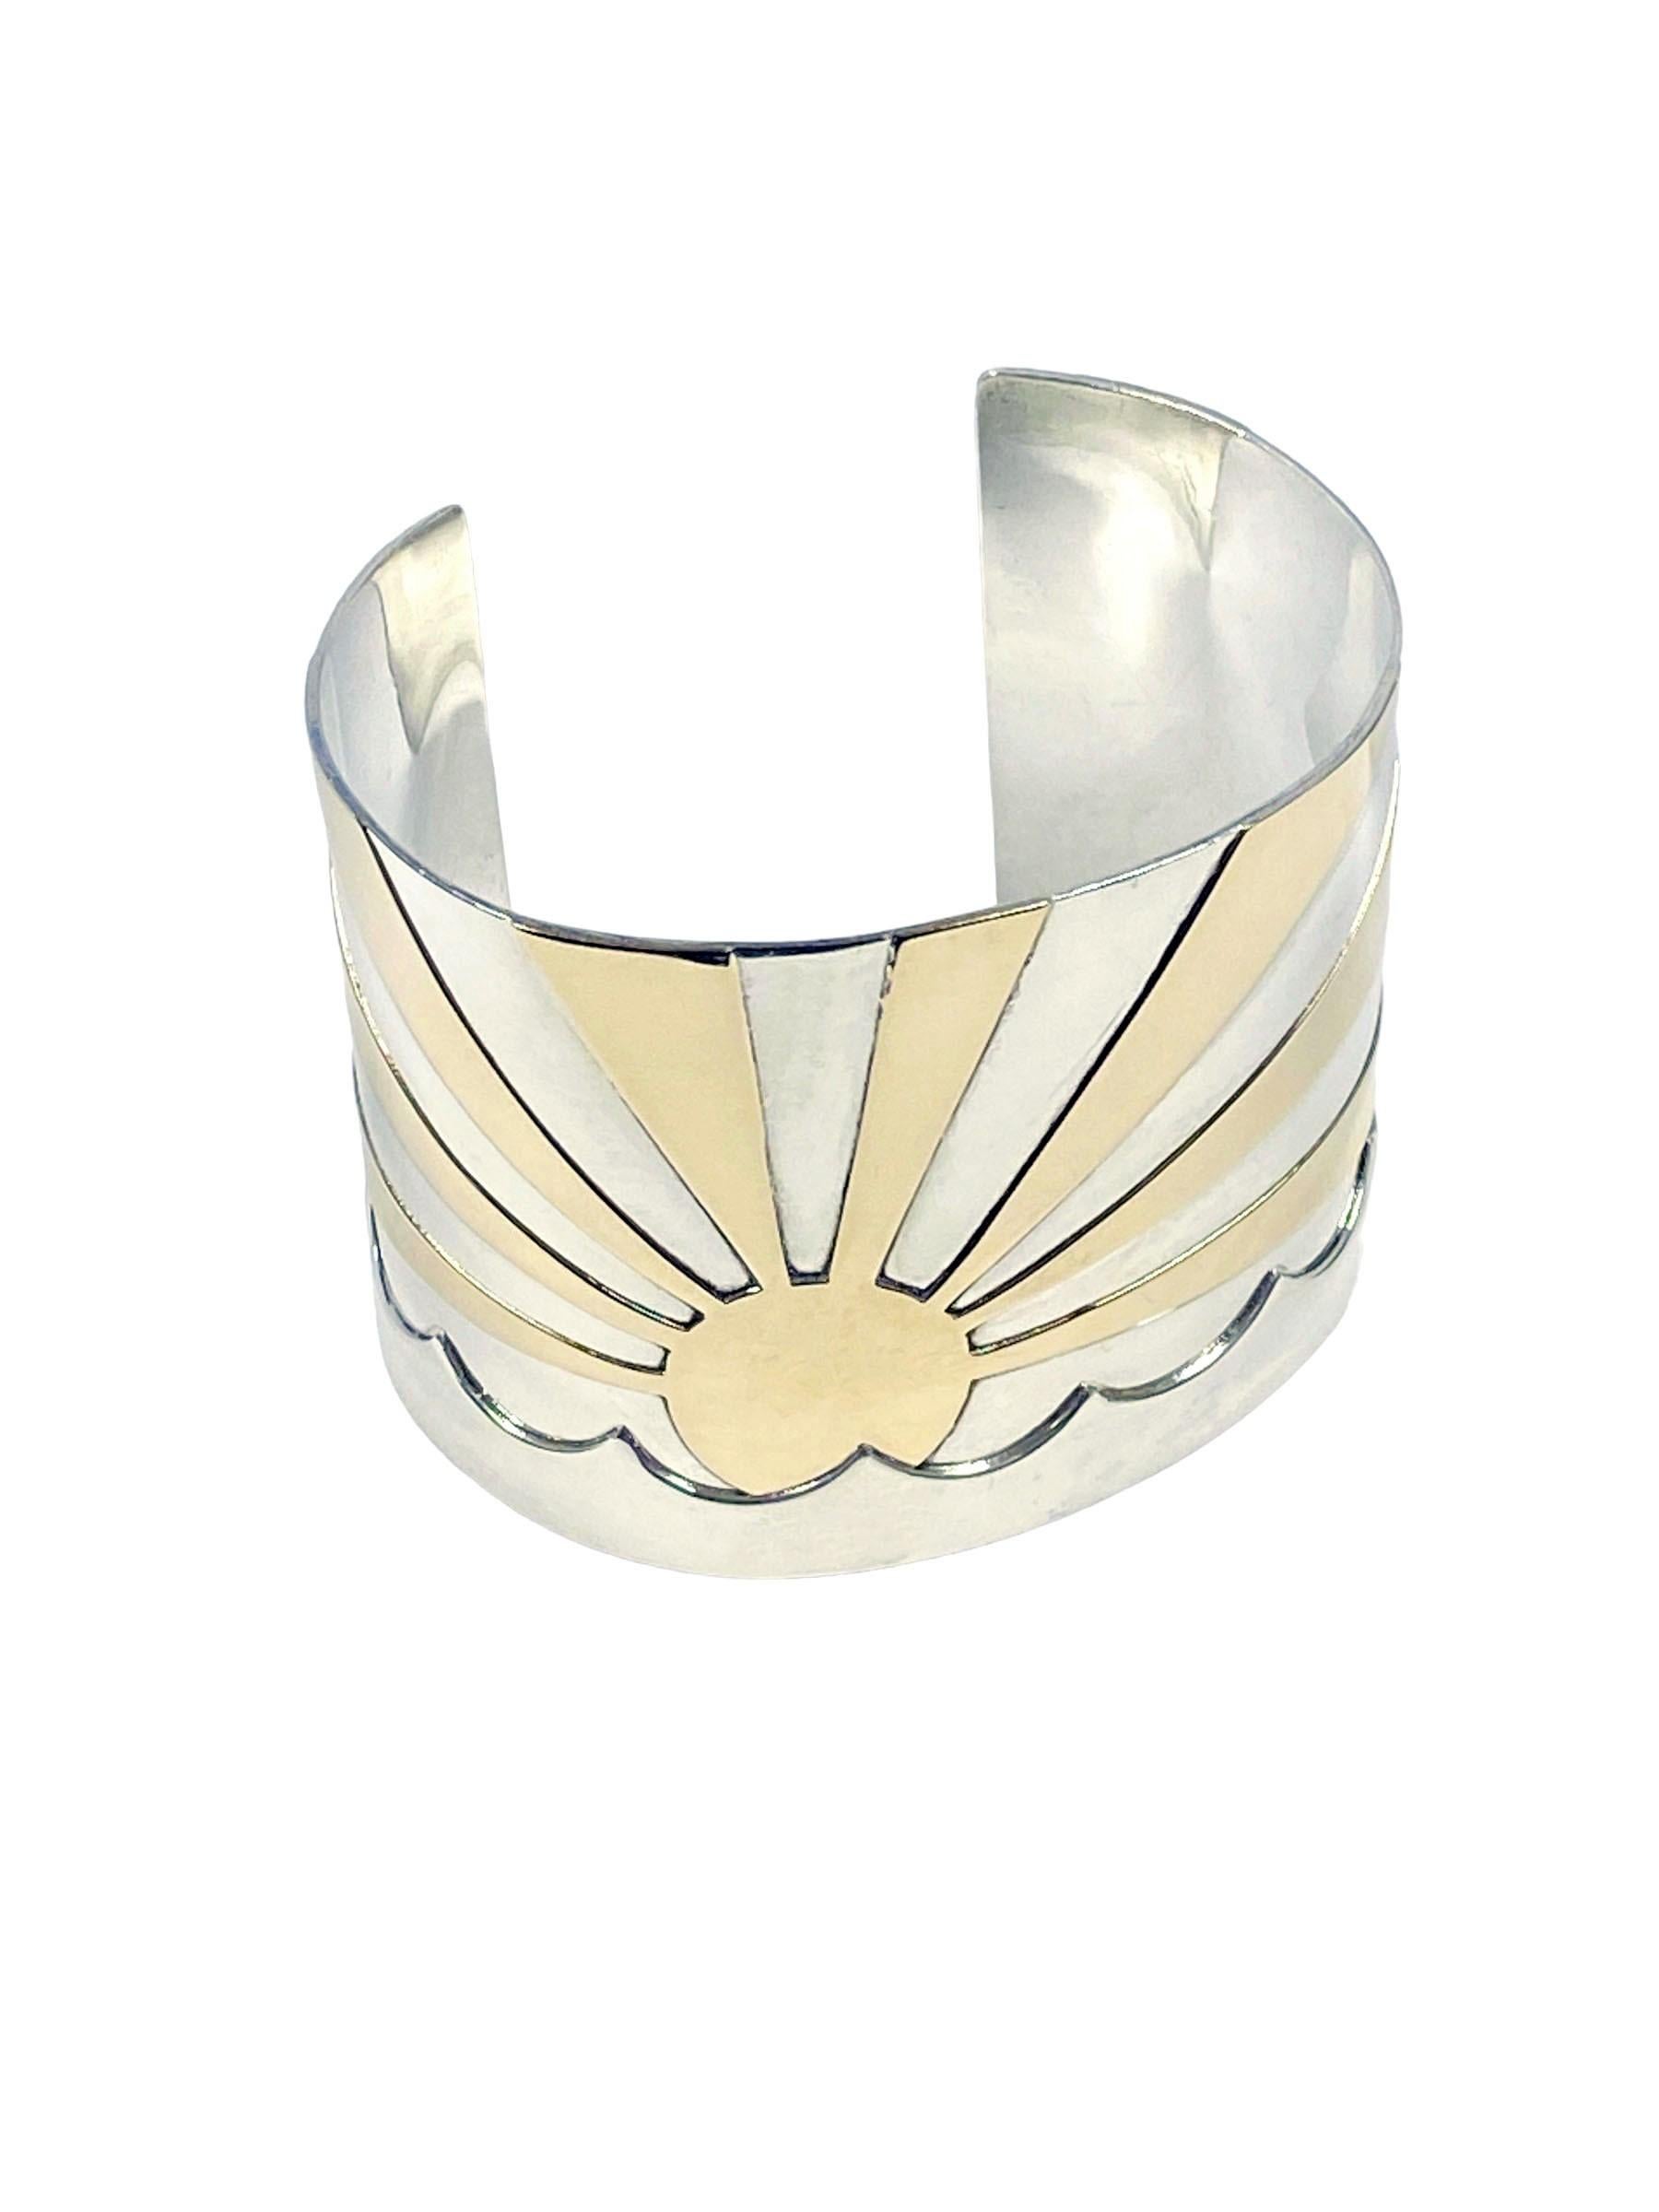 Circa 1970 Sunrise Cuff Bracelet by M.J. Savitt, measuring 1 5/8 inches wide,  14k Yellow Gold over Sterling Silver, 5 inches inside measurement with a 1 1/4 inches opening, plyable to fit a larger or smaller wrist.